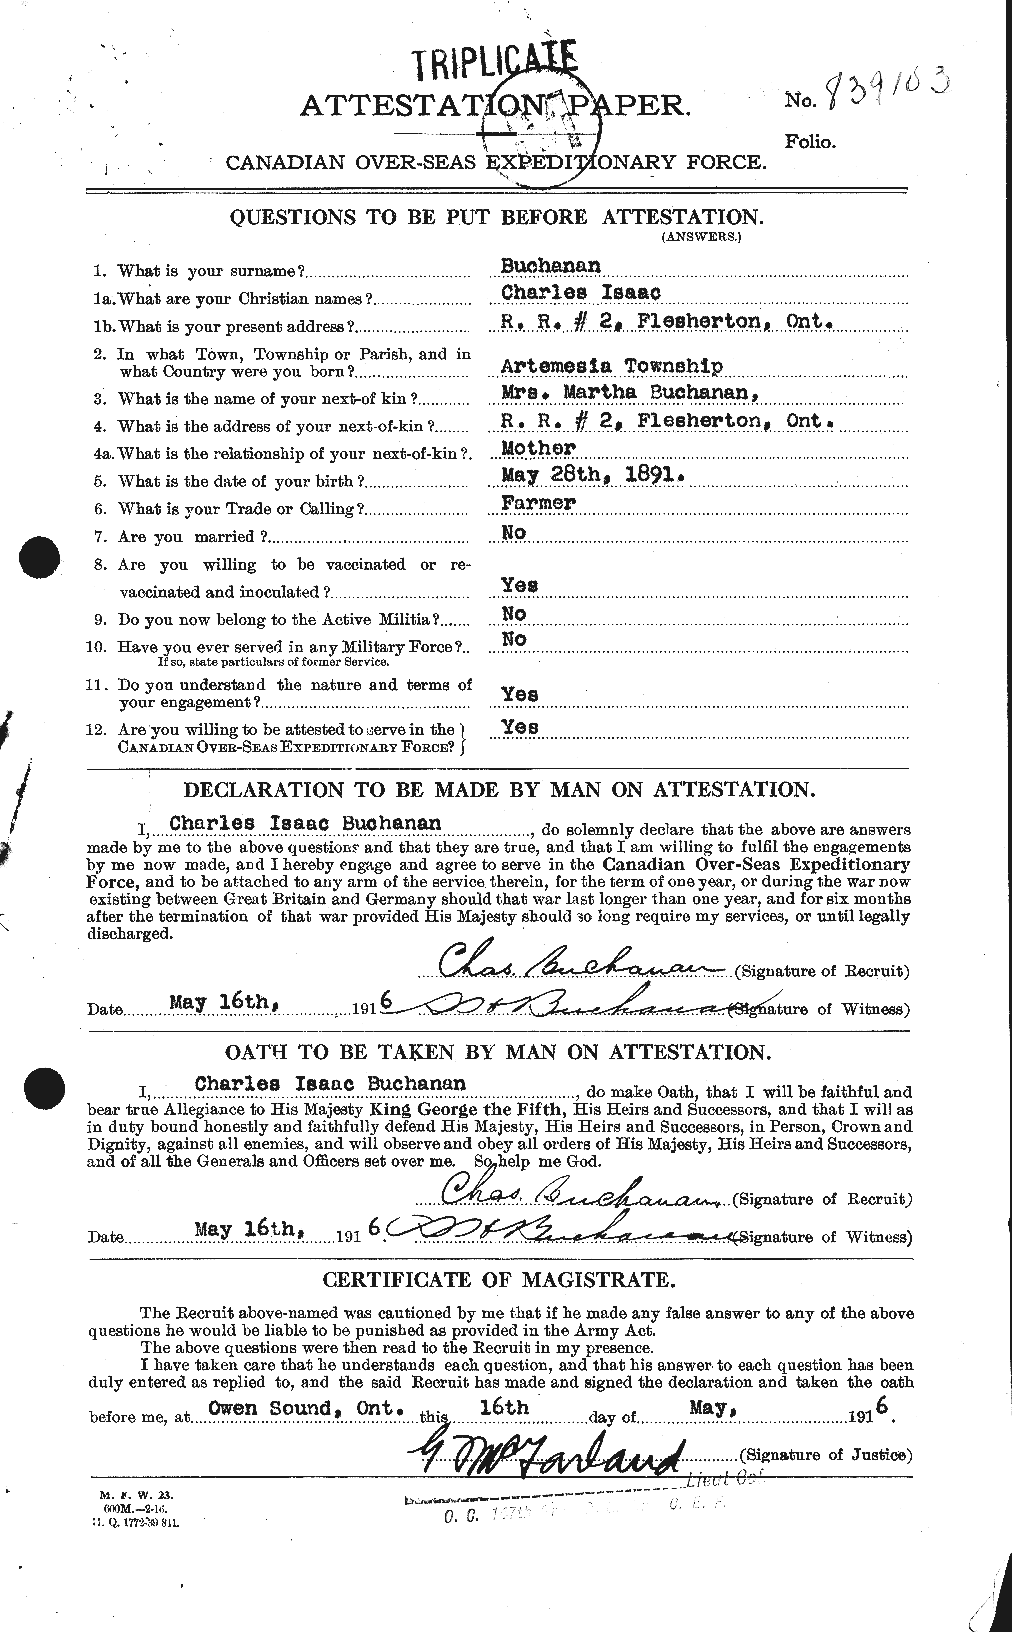 Personnel Records of the First World War - CEF 269135a